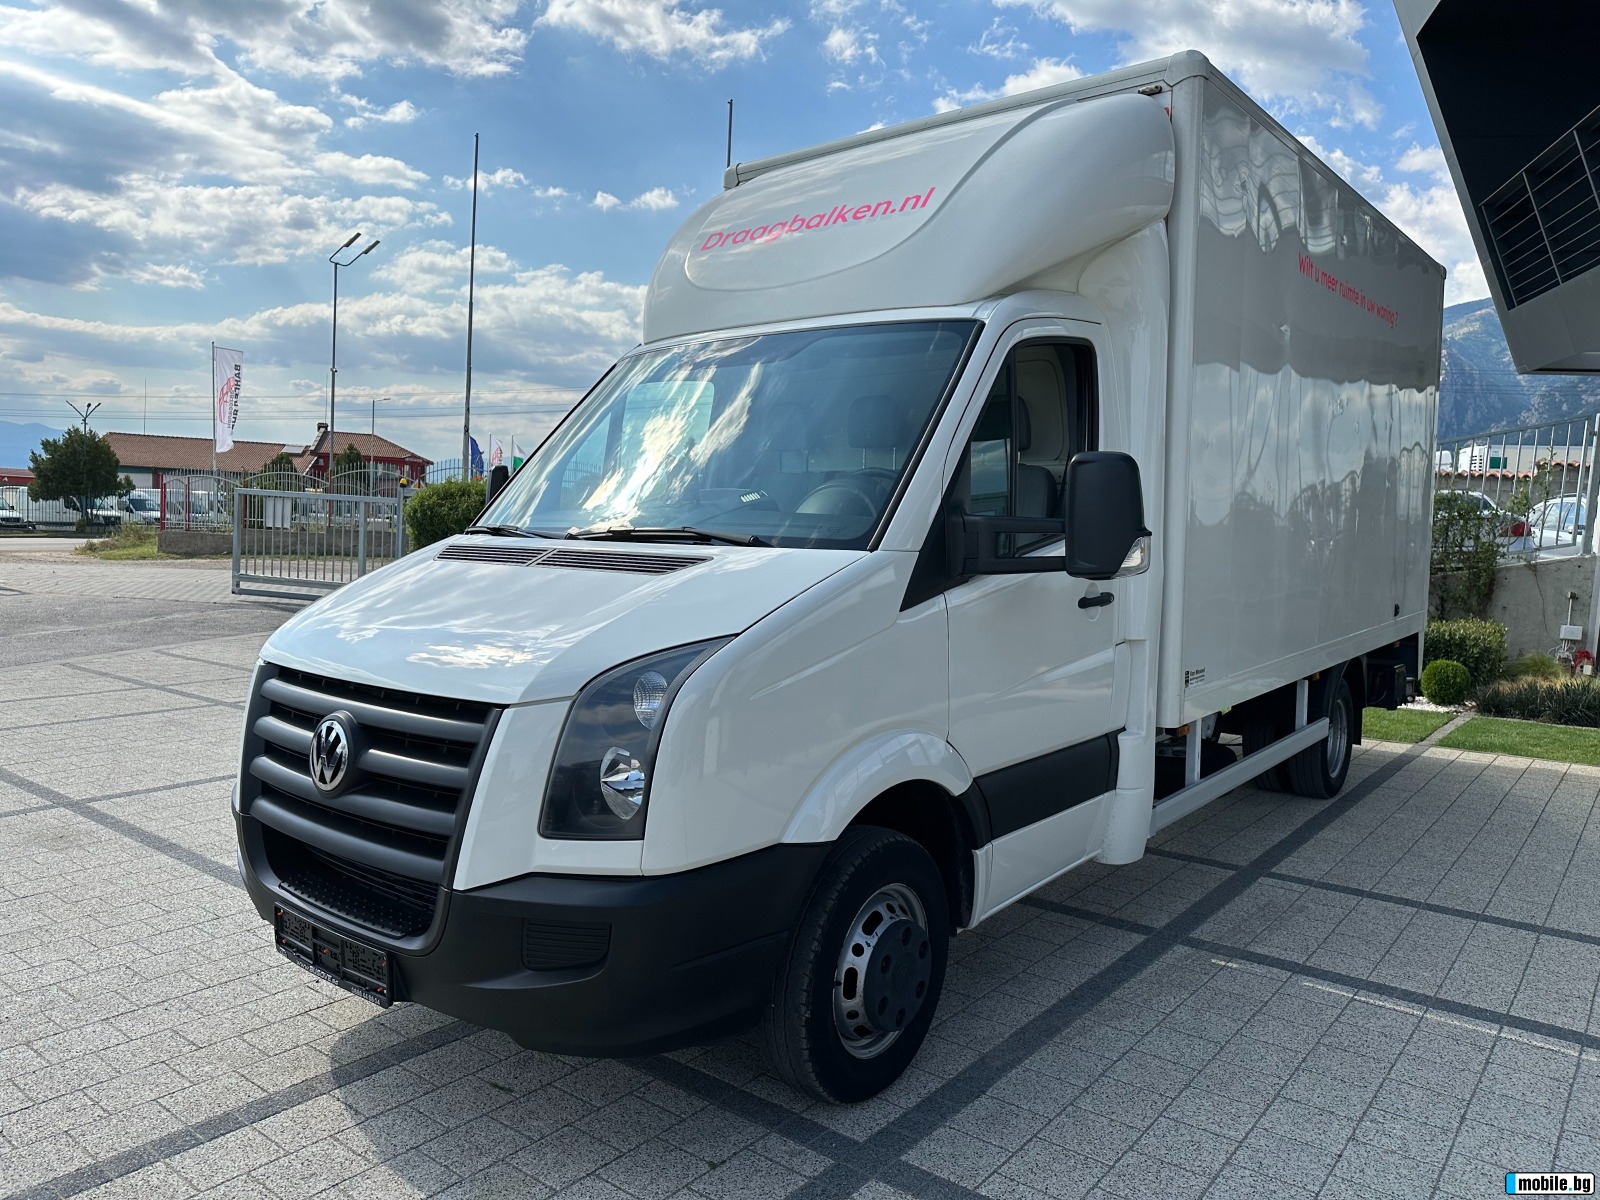 VW Crafter  3,5t. 4,33. 163..   +   | Mobile.bg   7